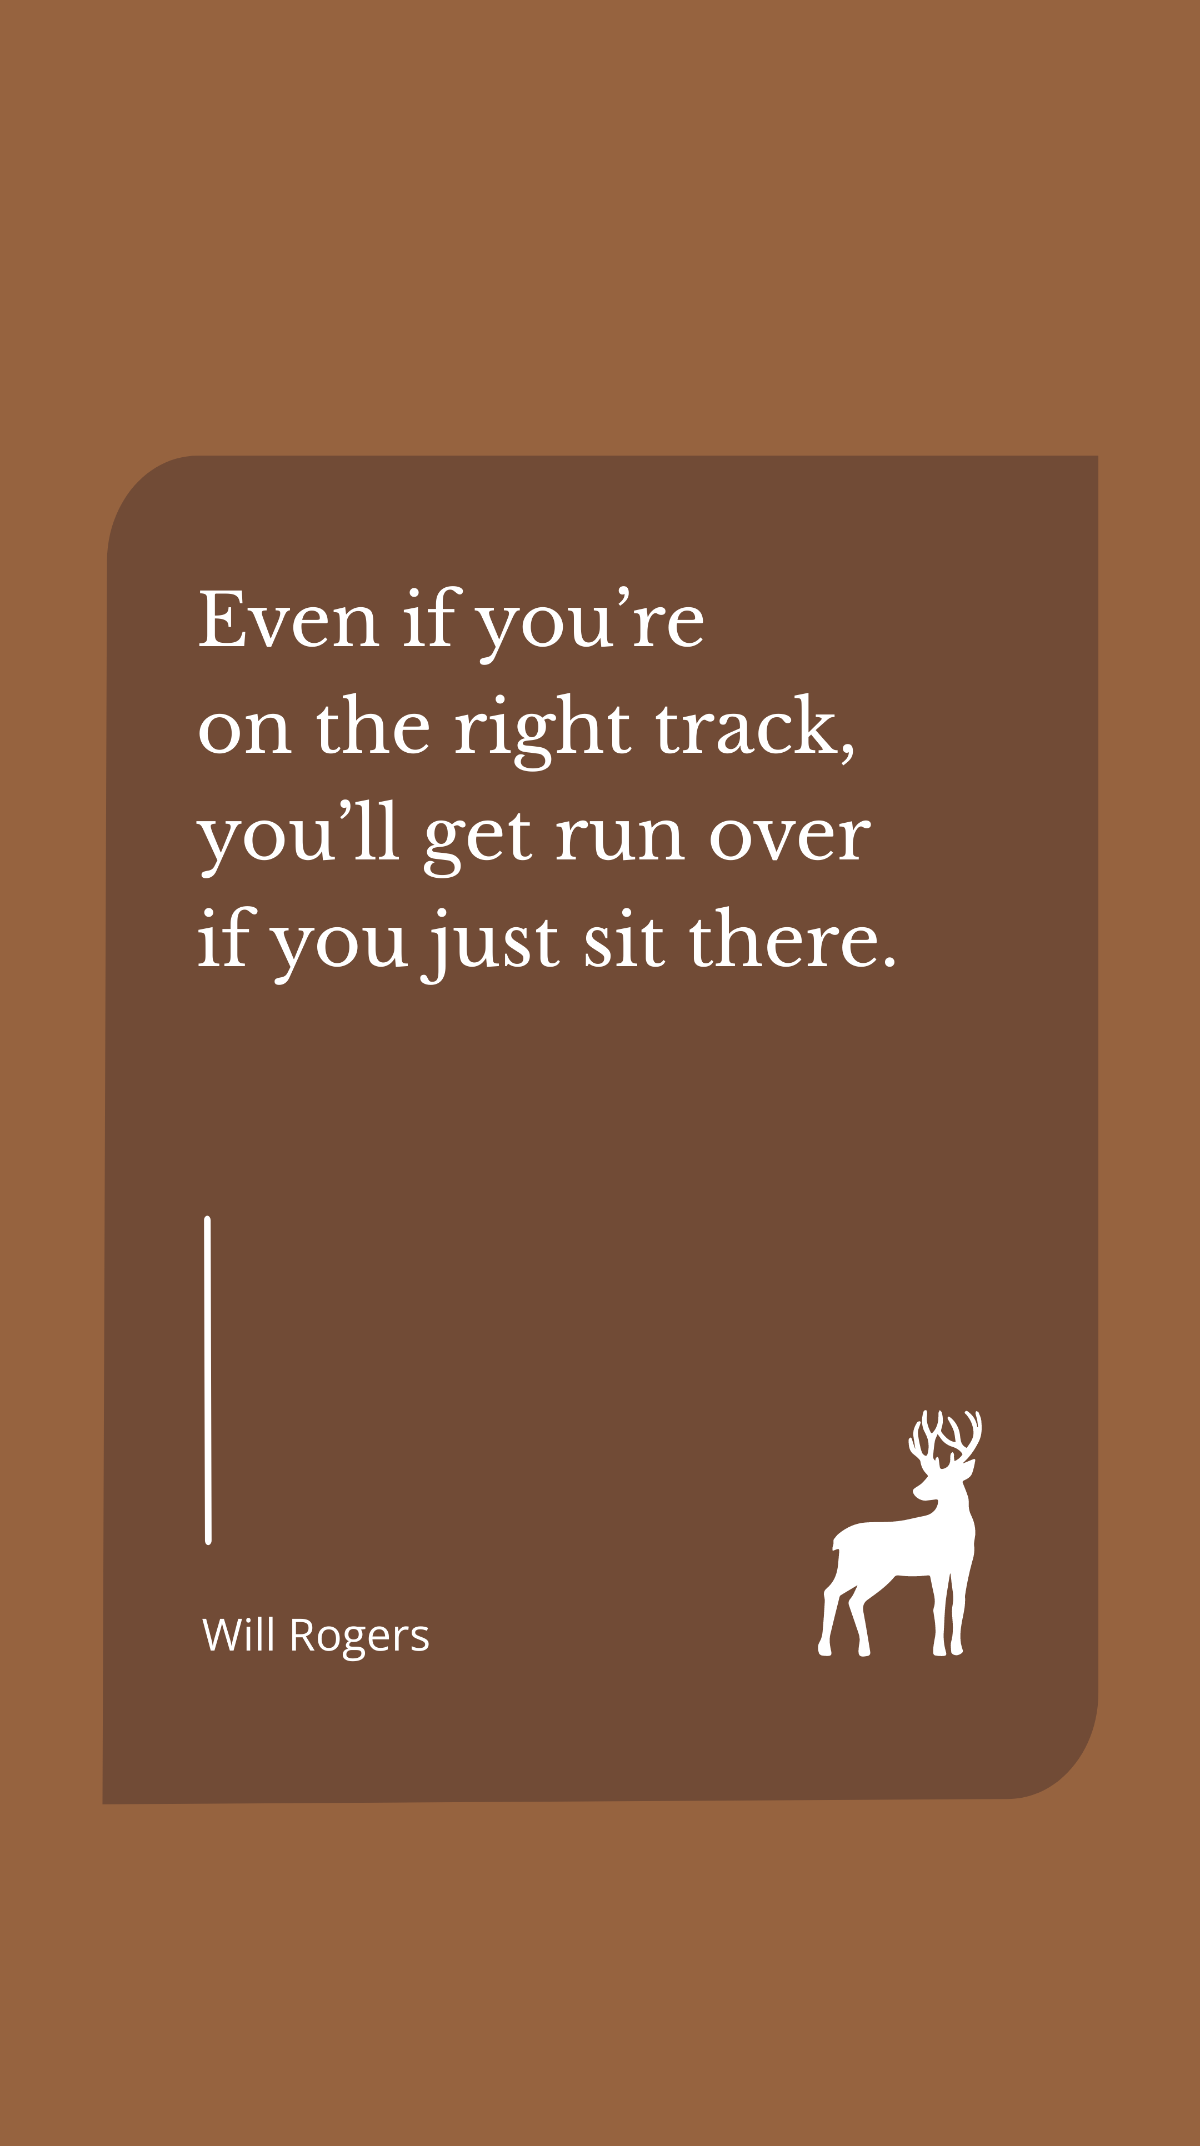 Will Rogers - Even if you’re on the right track, you’ll get run over if you just sit there Template